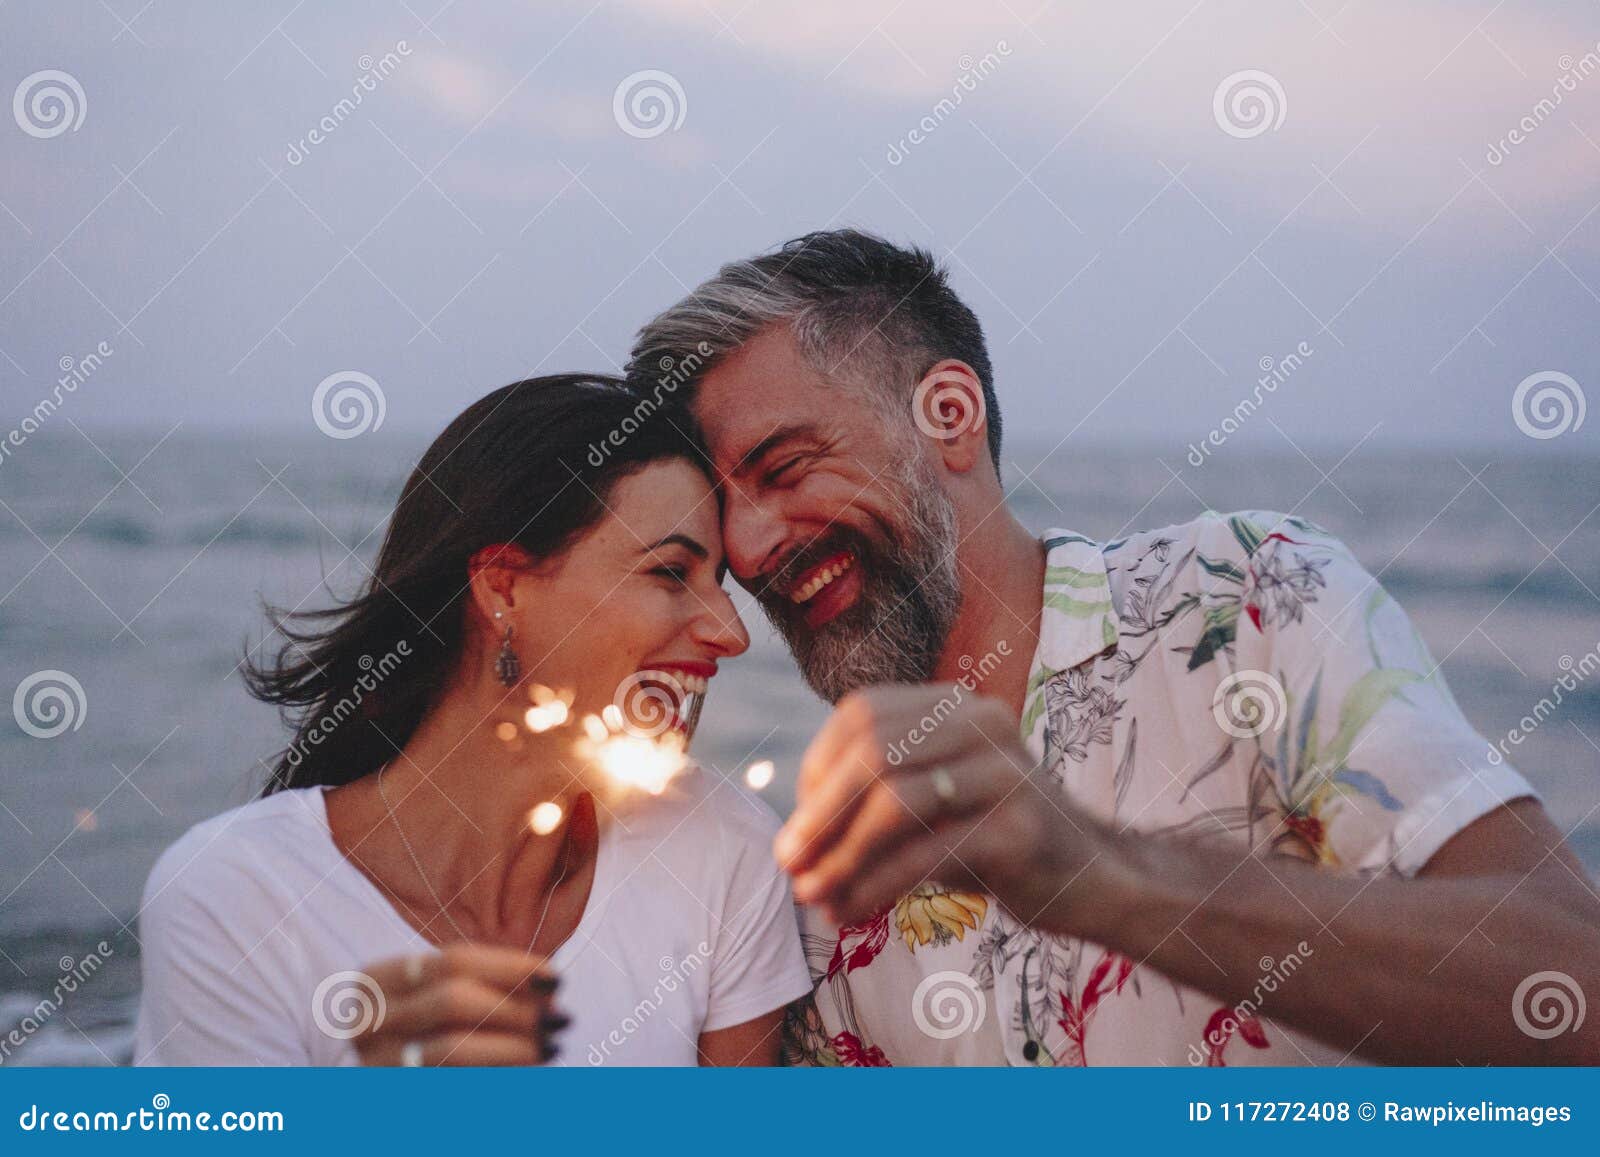 couple celebrating with sparklers at the beach